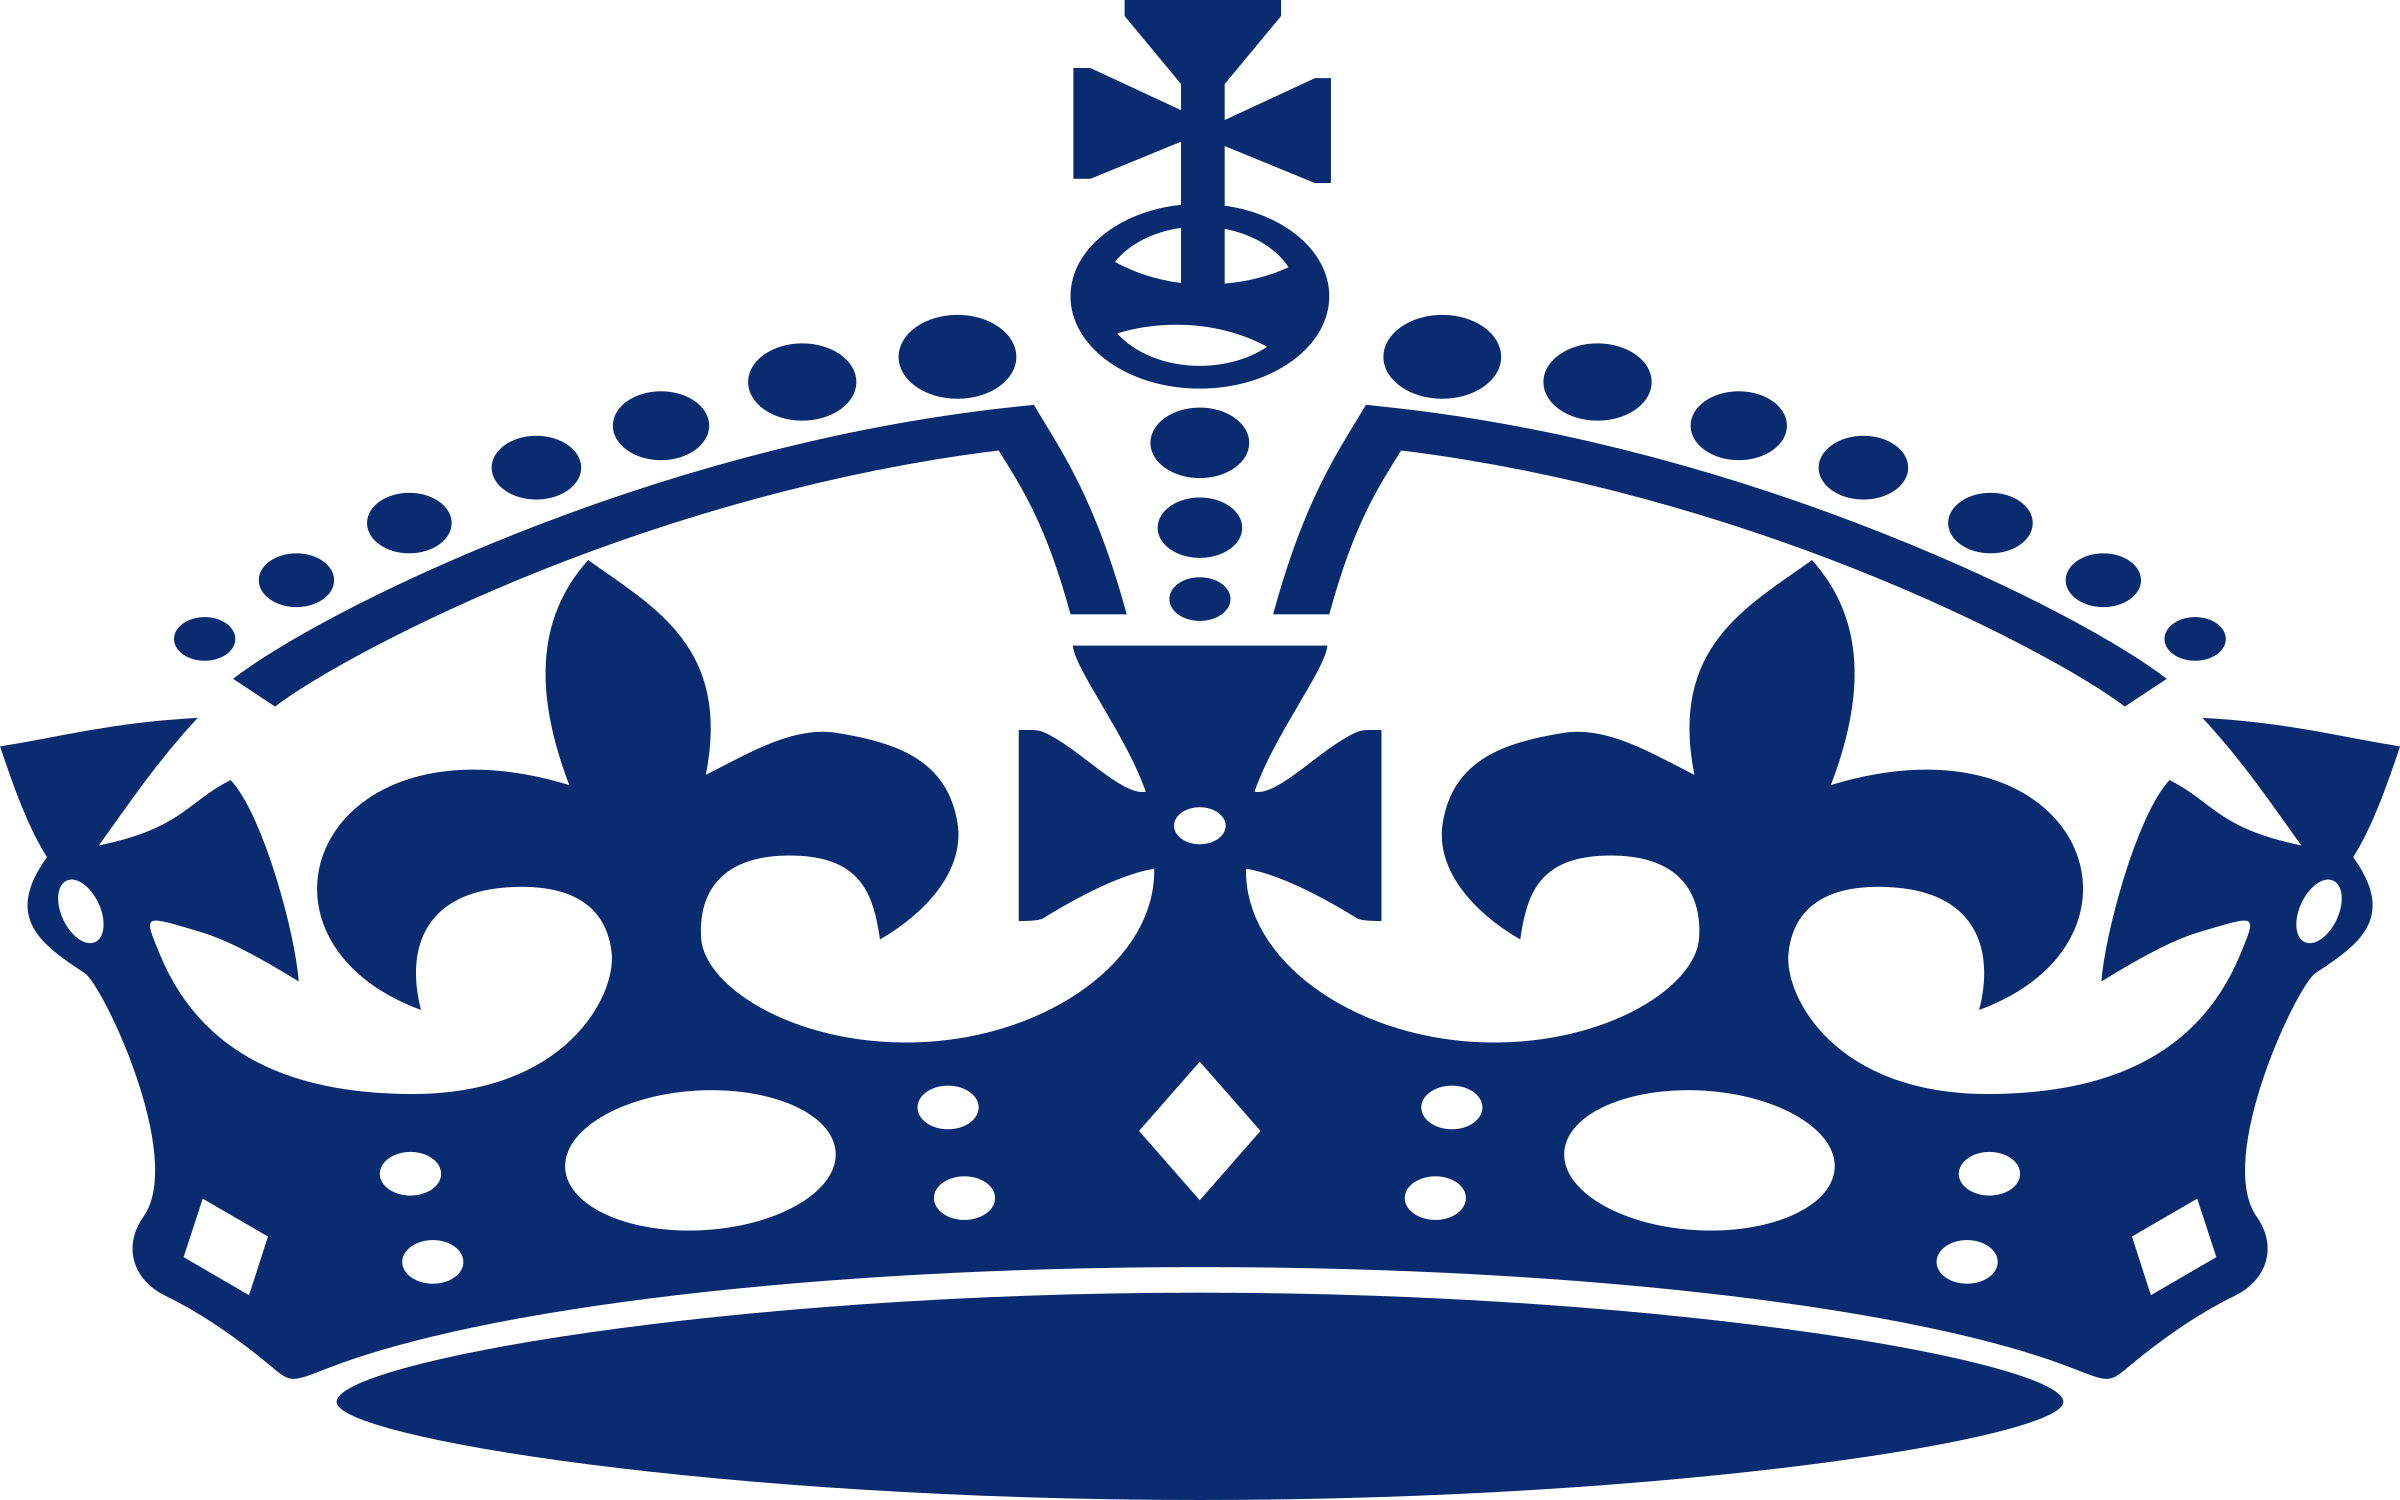 Free Blue Crown Png, Download Free Clip Art, Free Clip Art